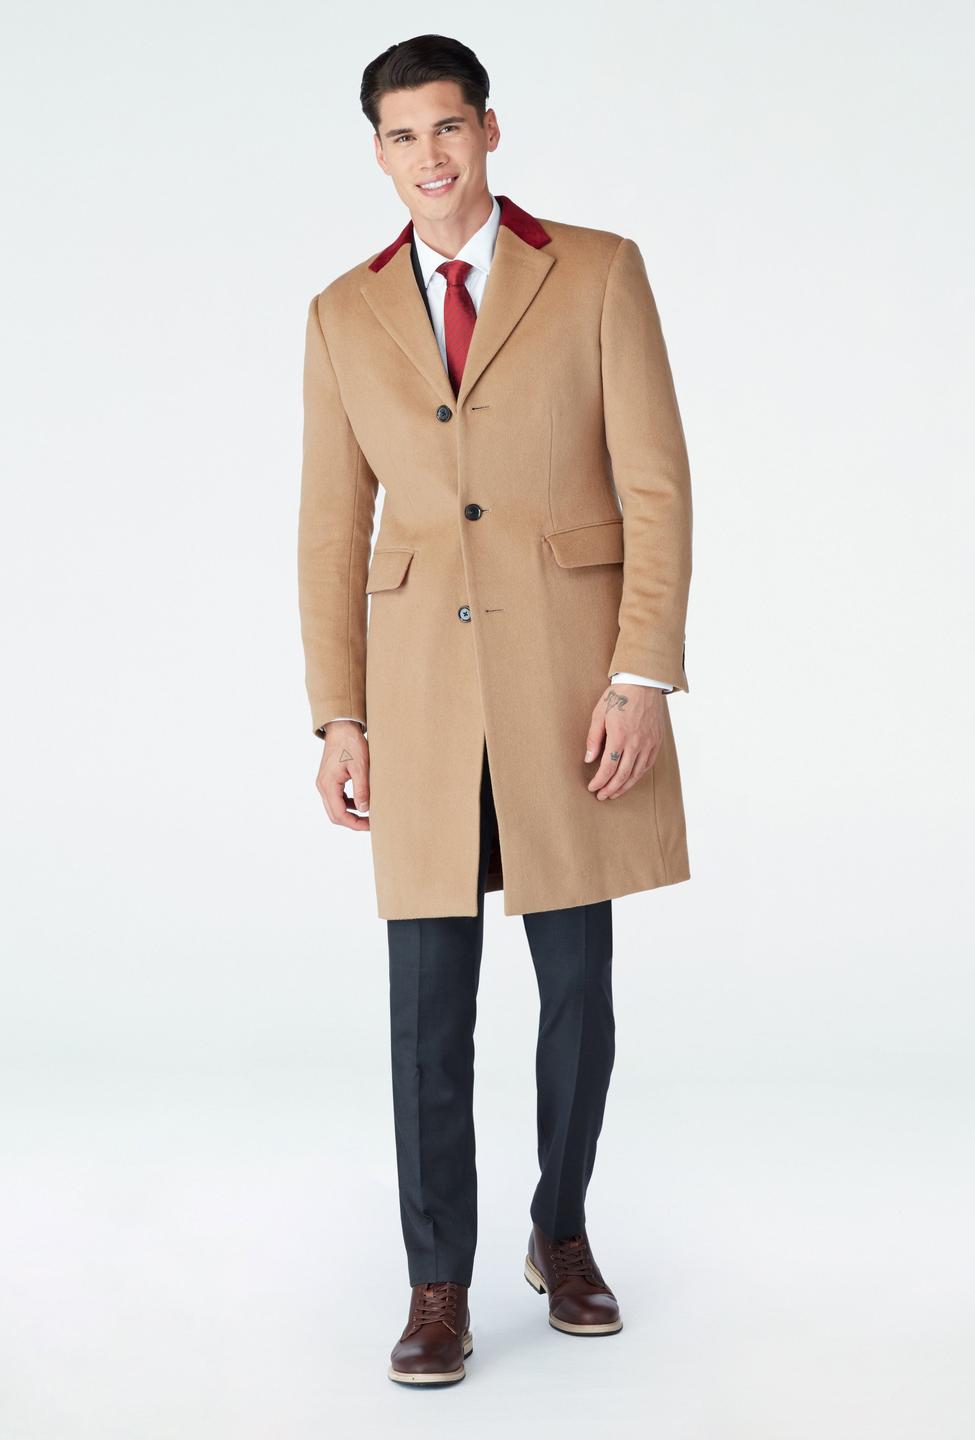 Brown outerwear - Huntley Solid Design from Indochino Collection